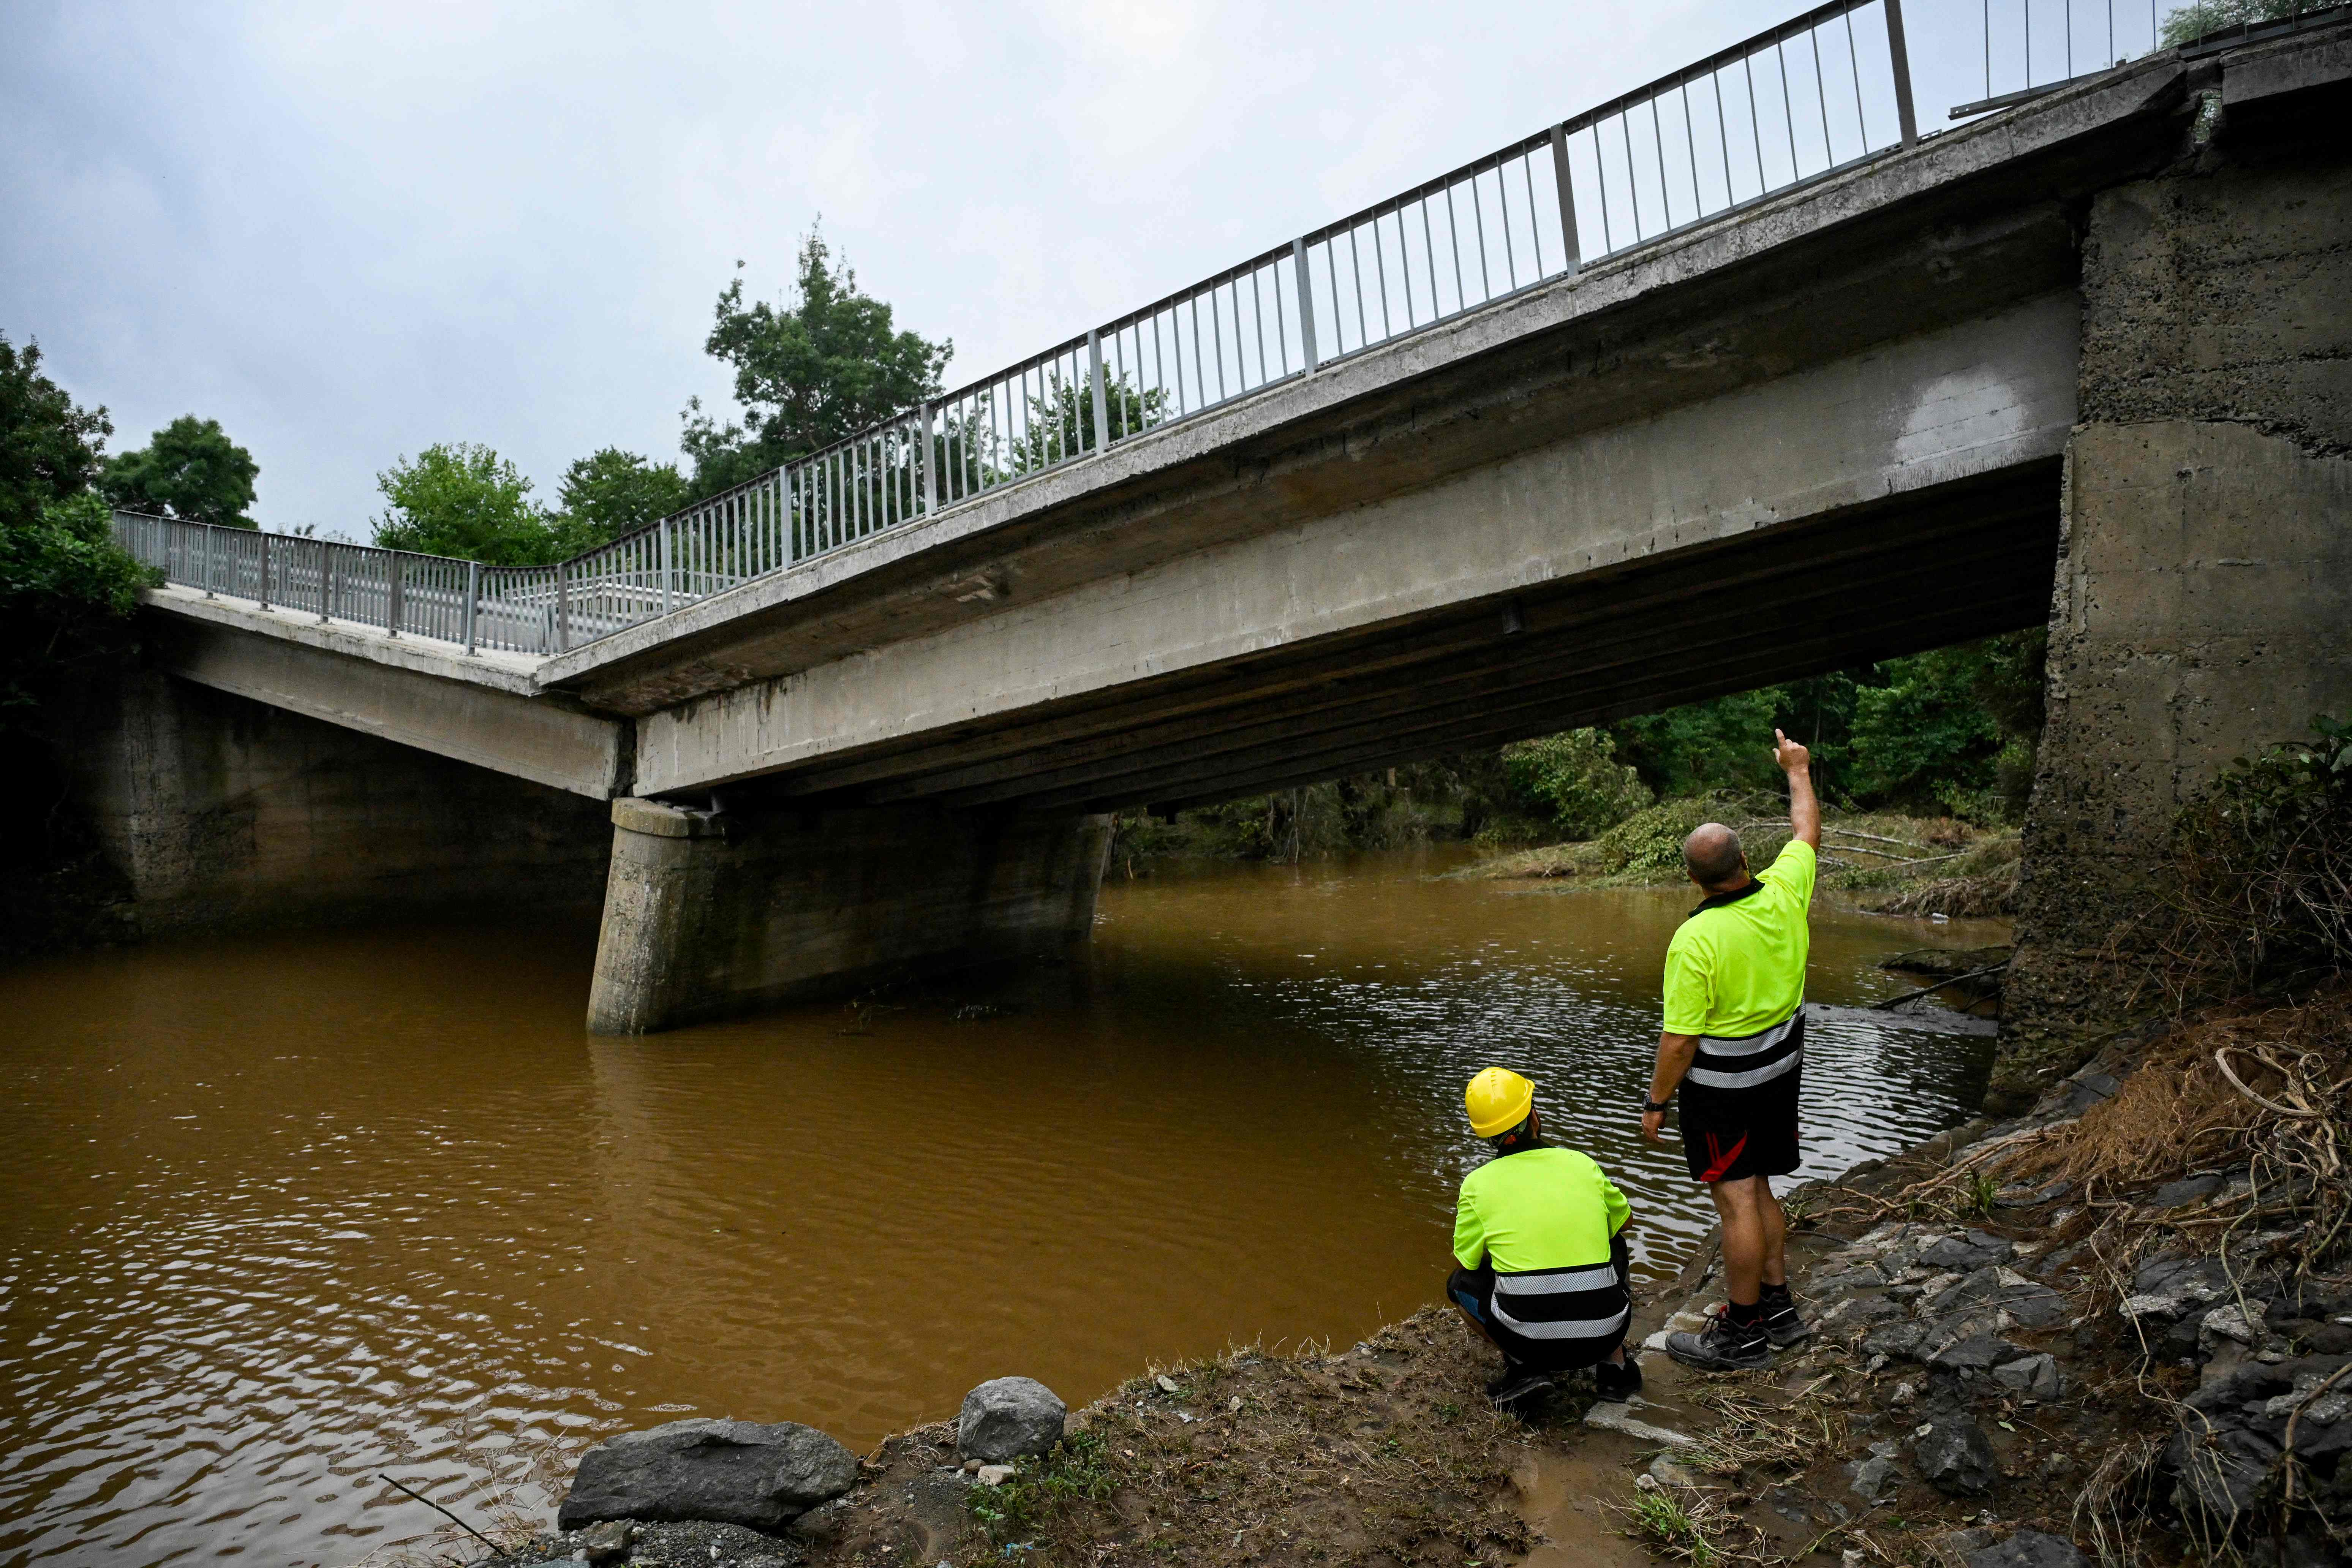 Engineers inspect a damaged bridge, which connects the city of Burgas and the Turkish border